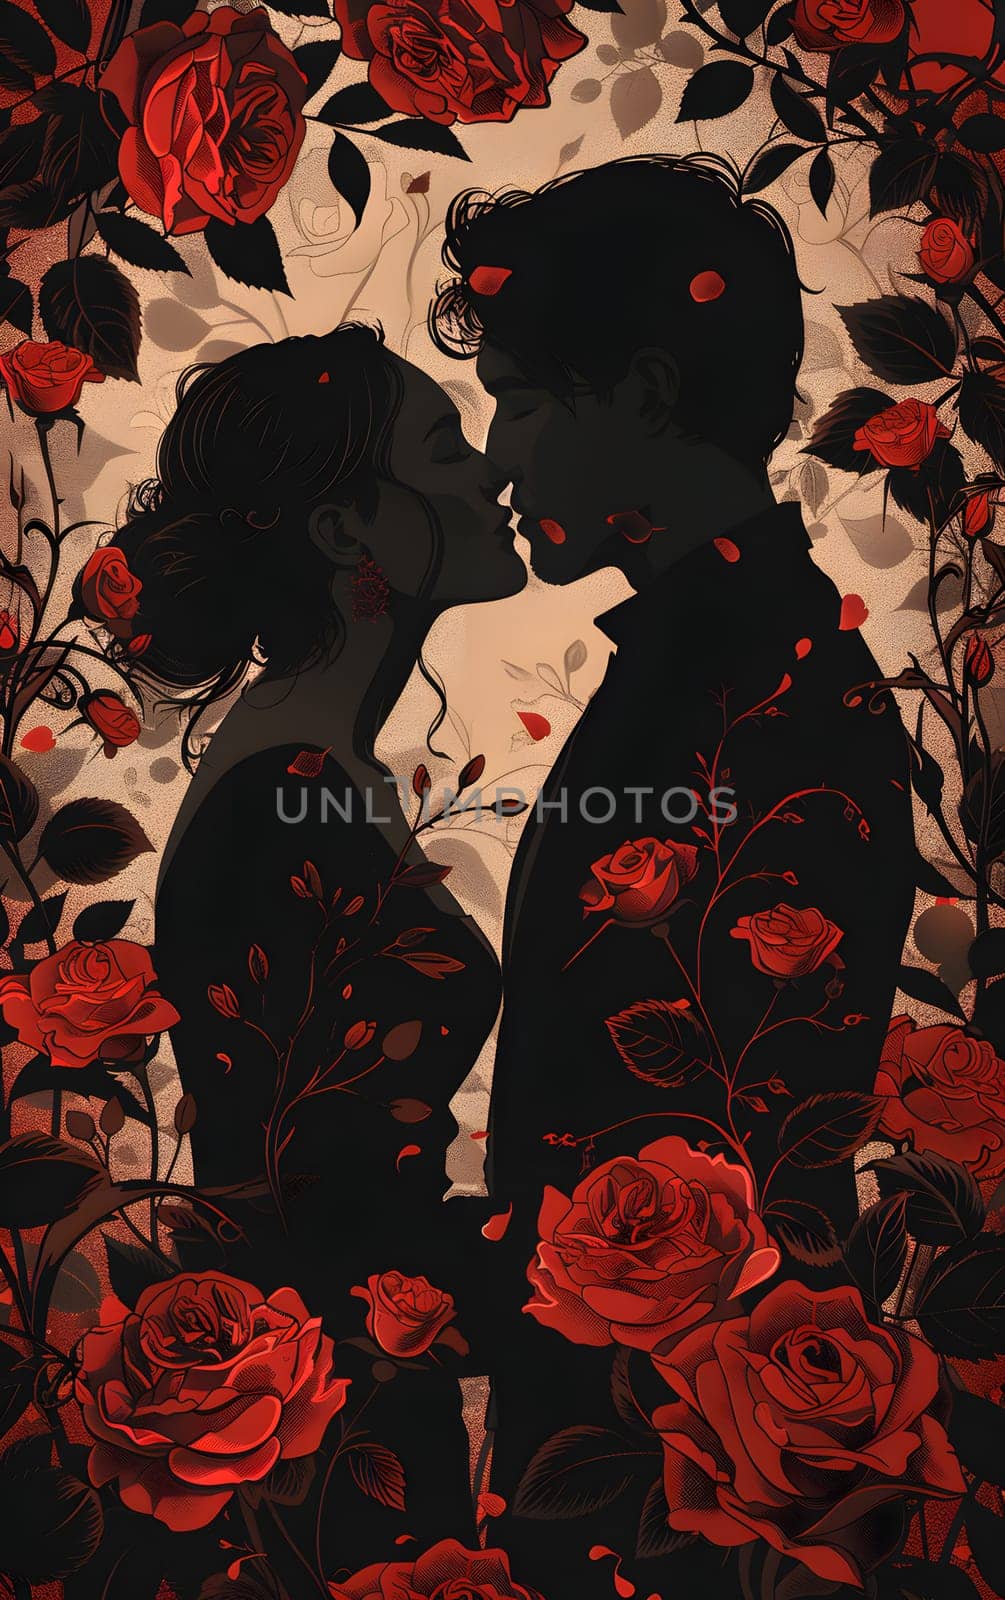 The couples tender kiss amidst the red roses creates a beautiful visual arts scene in the garden. The petals, flowers, and vibrant red colors form a mesmerizing pattern in this romantic event